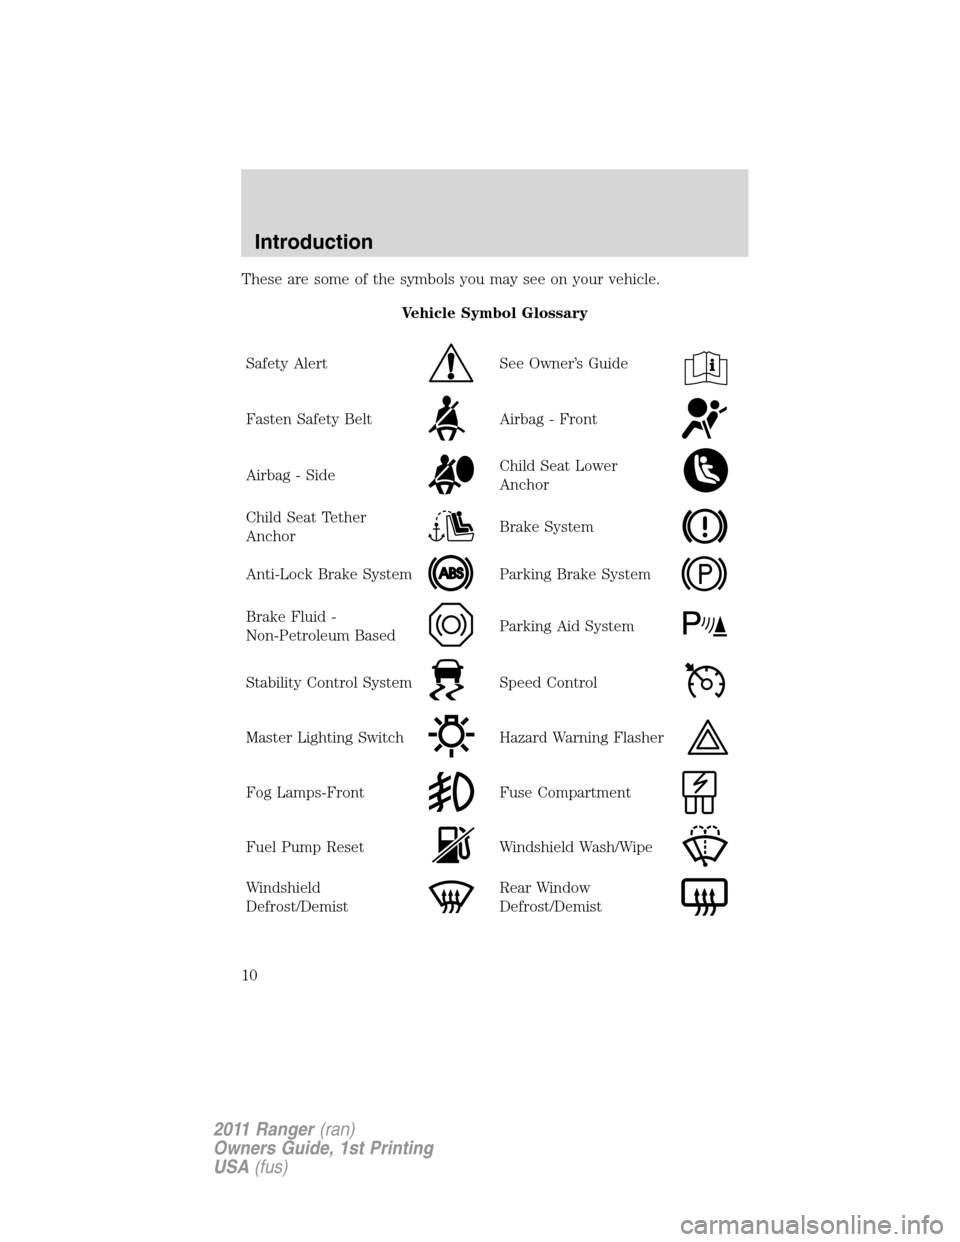 FORD RANGER 2011 2.G Owners Manual These are some of the symbols you may see on your vehicle.
Vehicle Symbol Glossary
Safety Alert
See Owner’s Guide
Fasten Safety BeltAirbag - Front
Airbag - SideChild Seat Lower
Anchor
Child Seat Tet